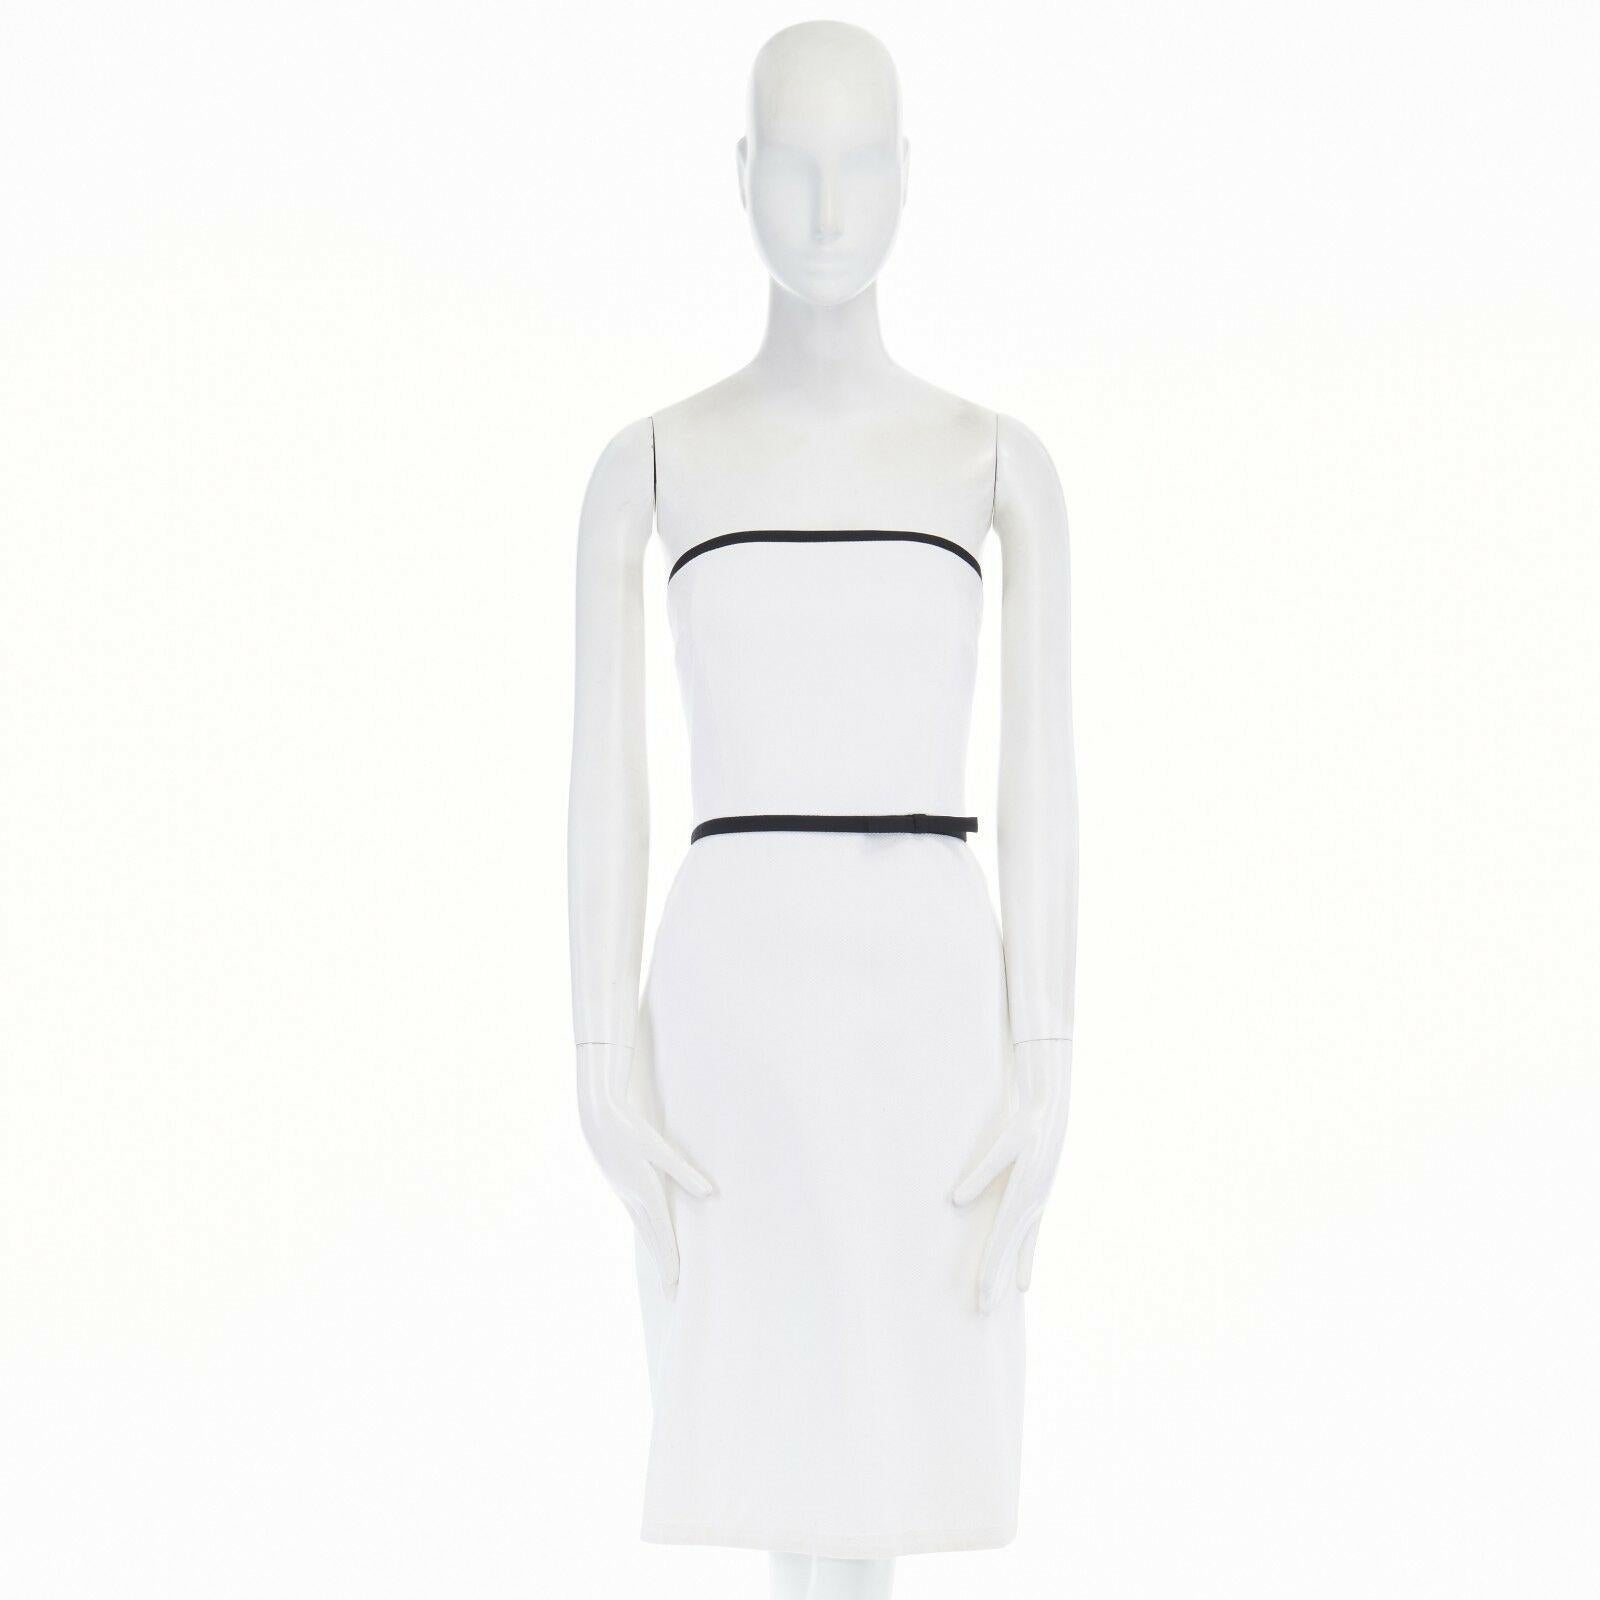 LAUNDRY SHELLI SEGAL white cotton black bow trim strapless cocktail dress US6 M 
Reference: LACG/A00199 
Brand: Laundry 
Designer: Shelli Segal 
Material: Cotton 
Color: White 
Pattern: Solid 
Closure: Zip 
Extra Detail: White textured cotton. Black